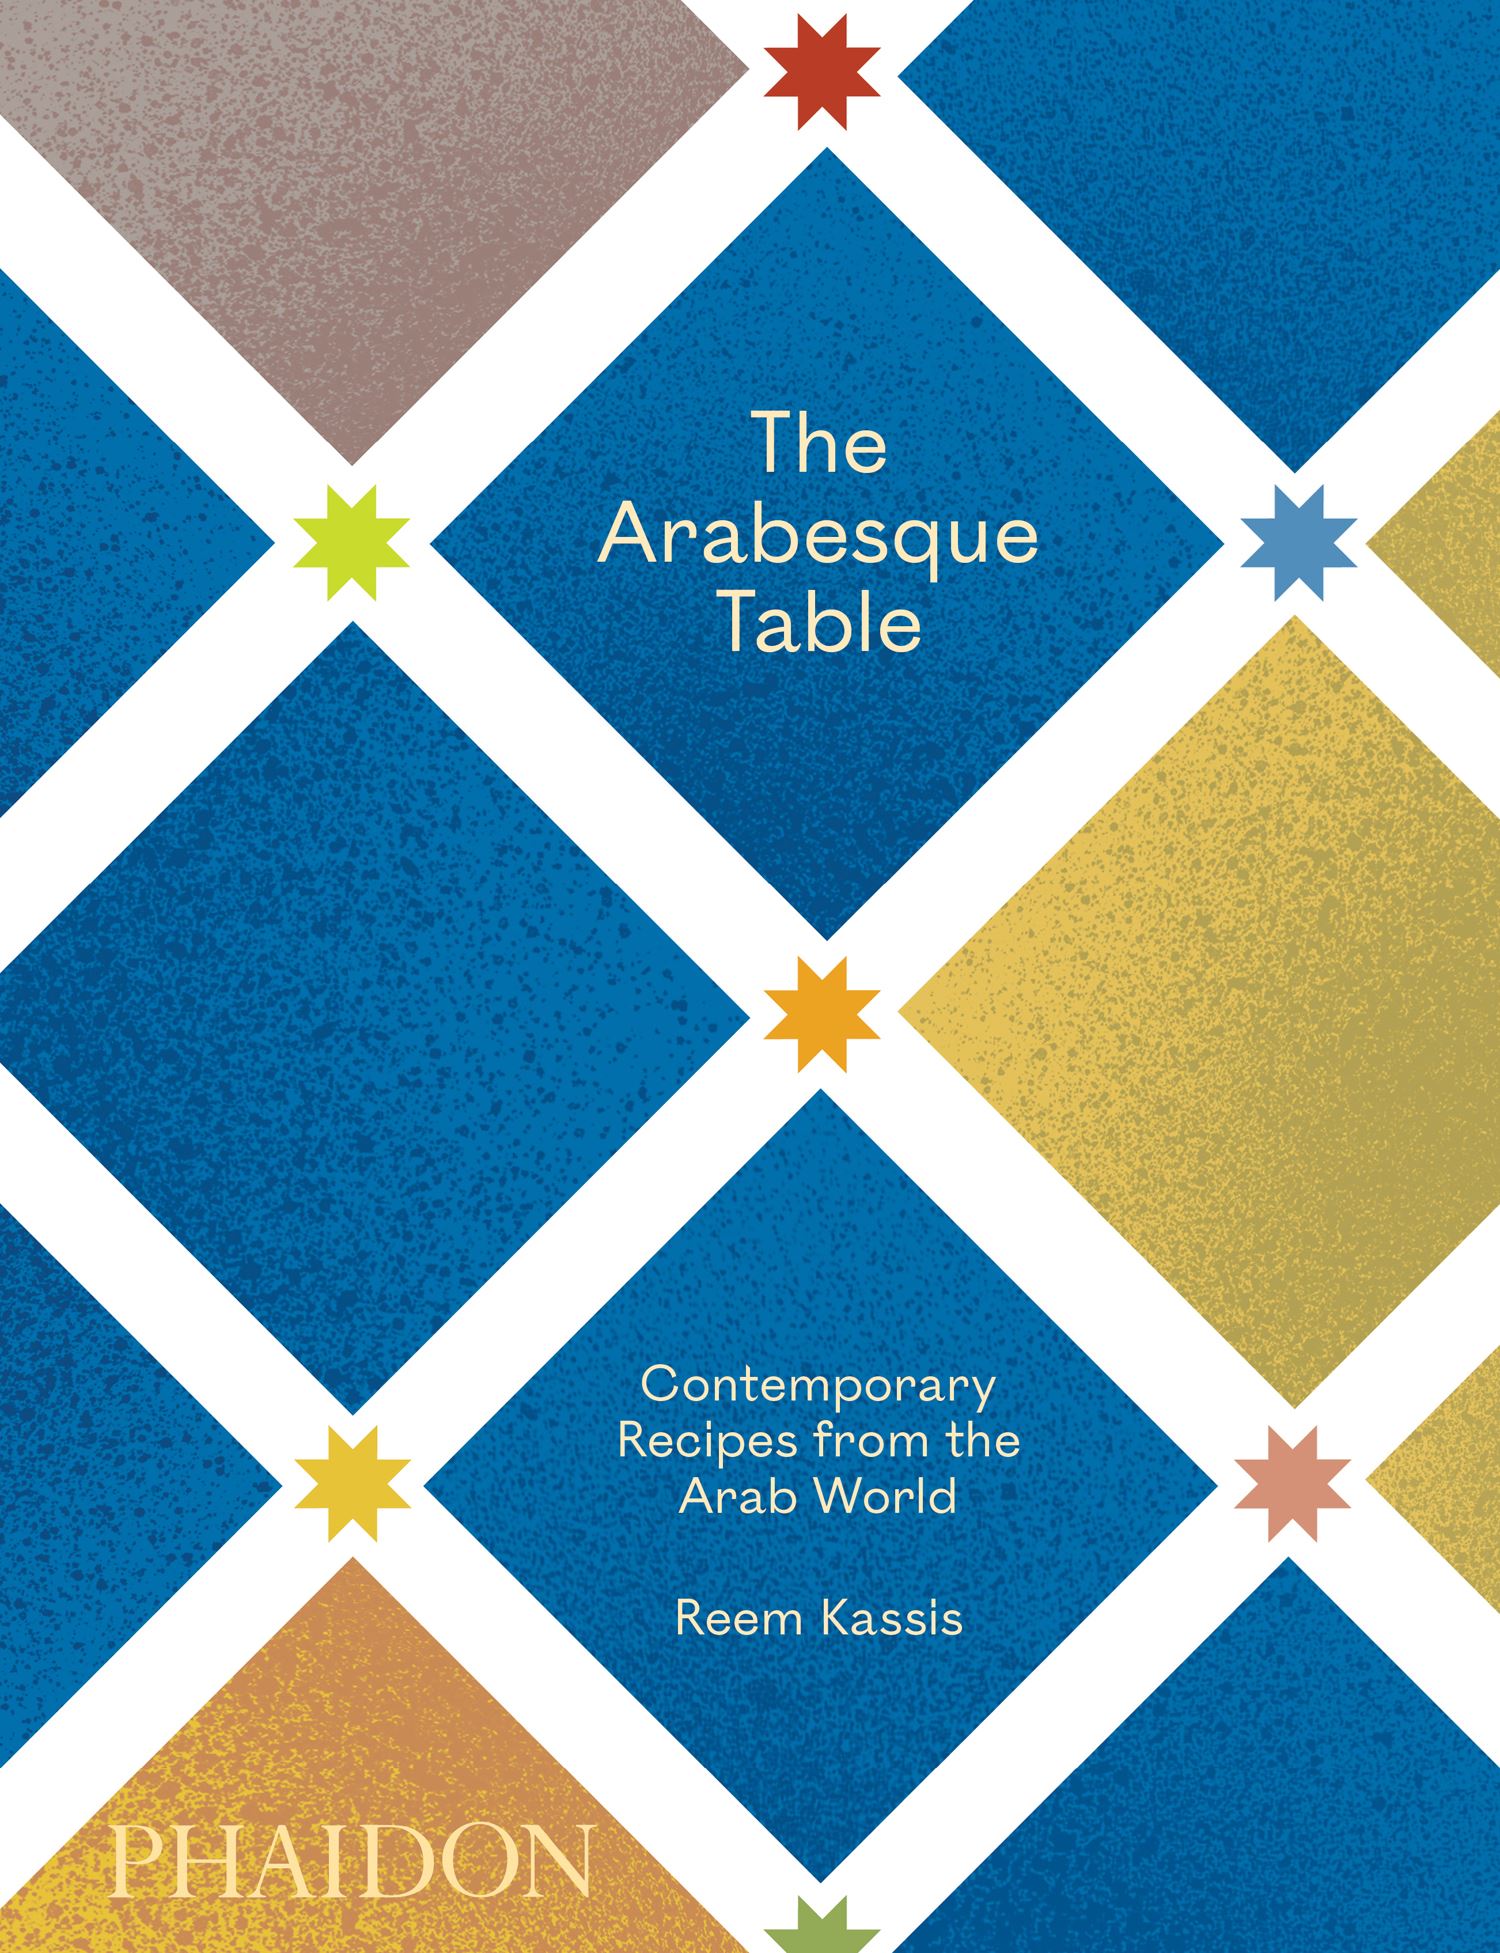 The Arabesque Table Cookery Book